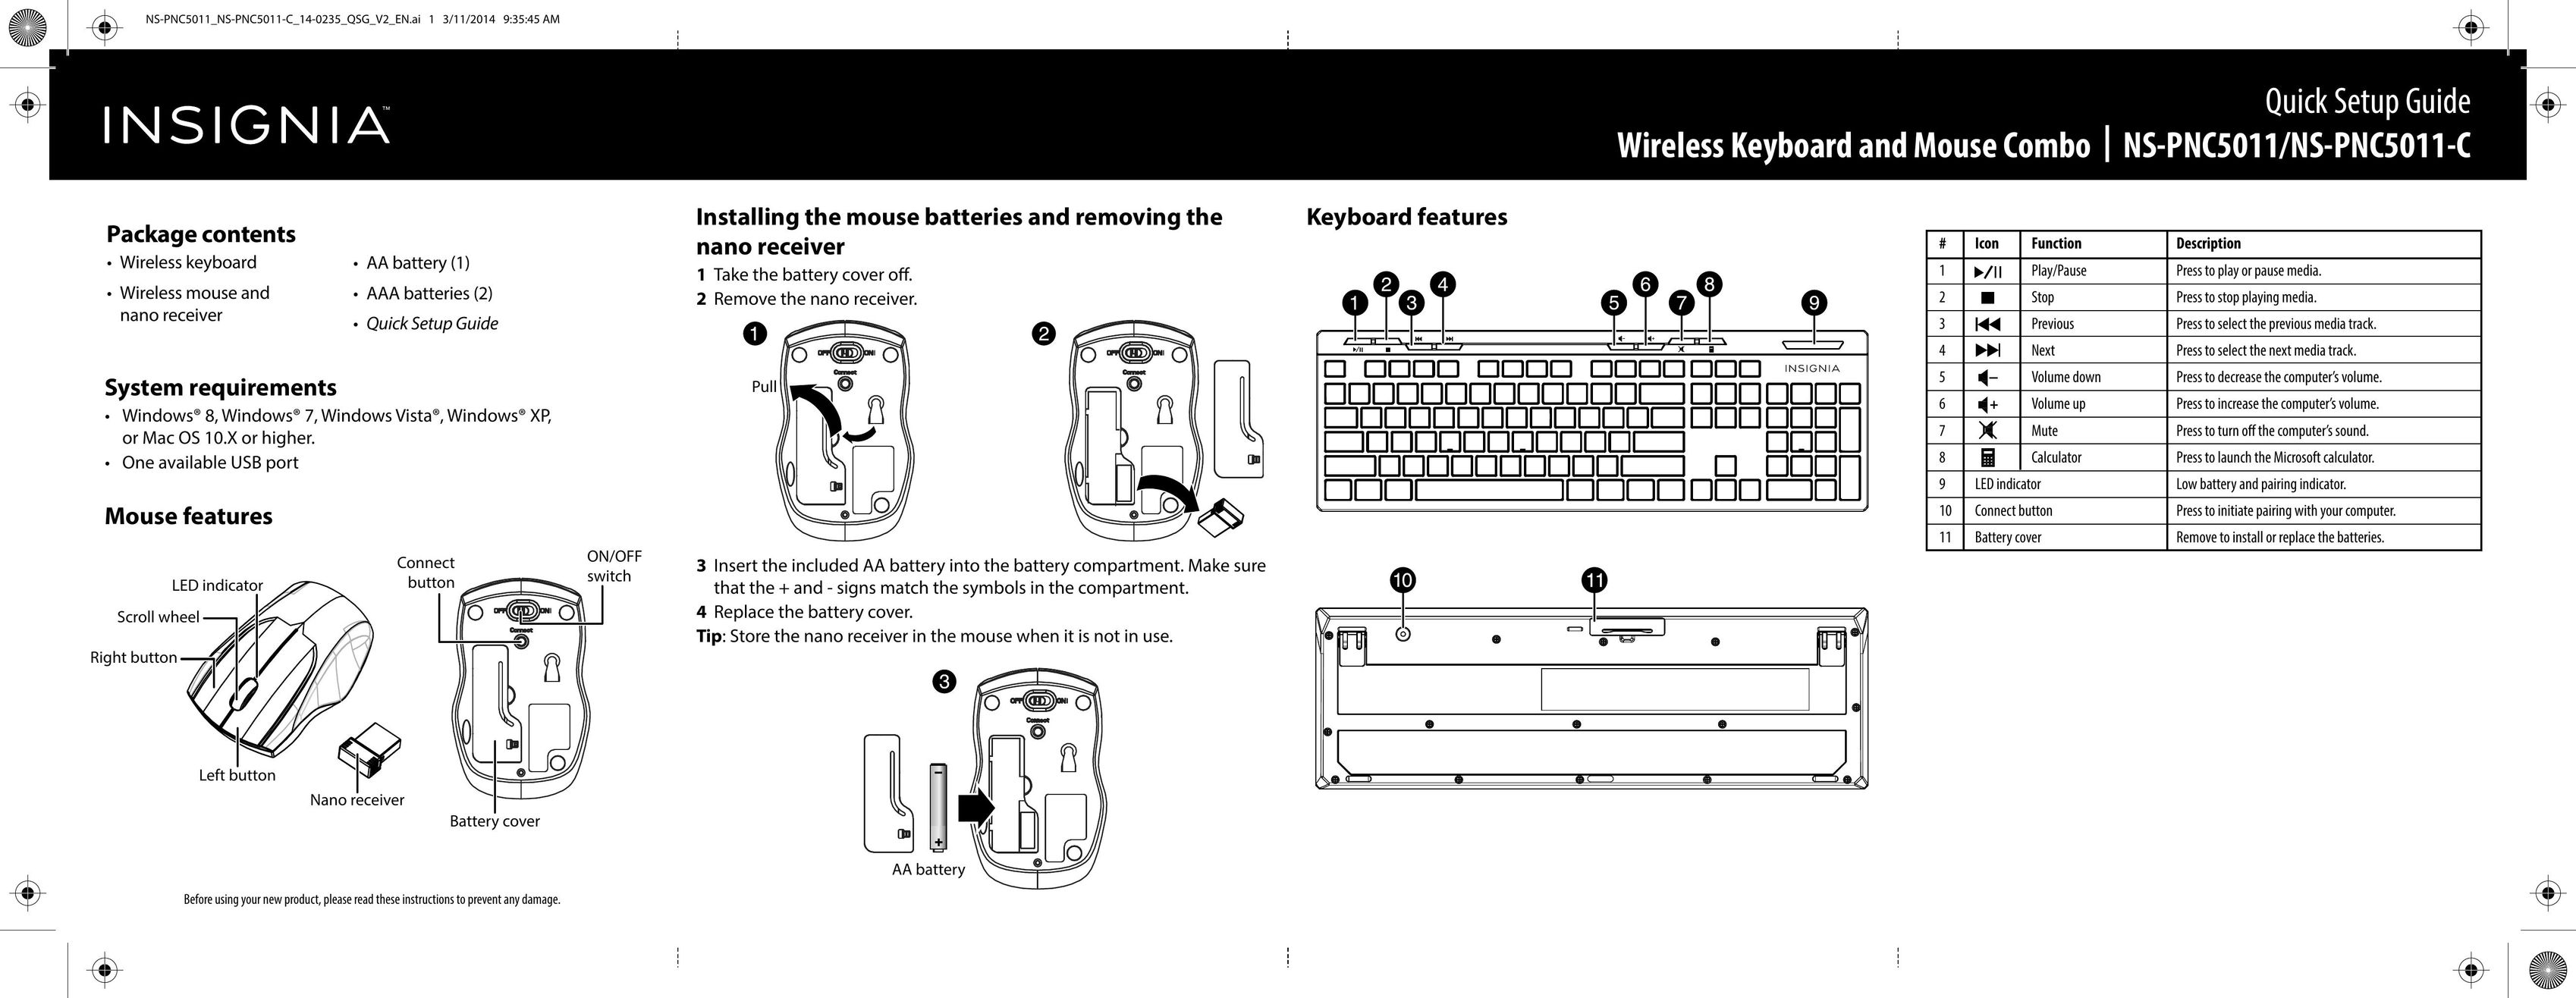 Insignia NS-PNC5011 Mouse User Manual